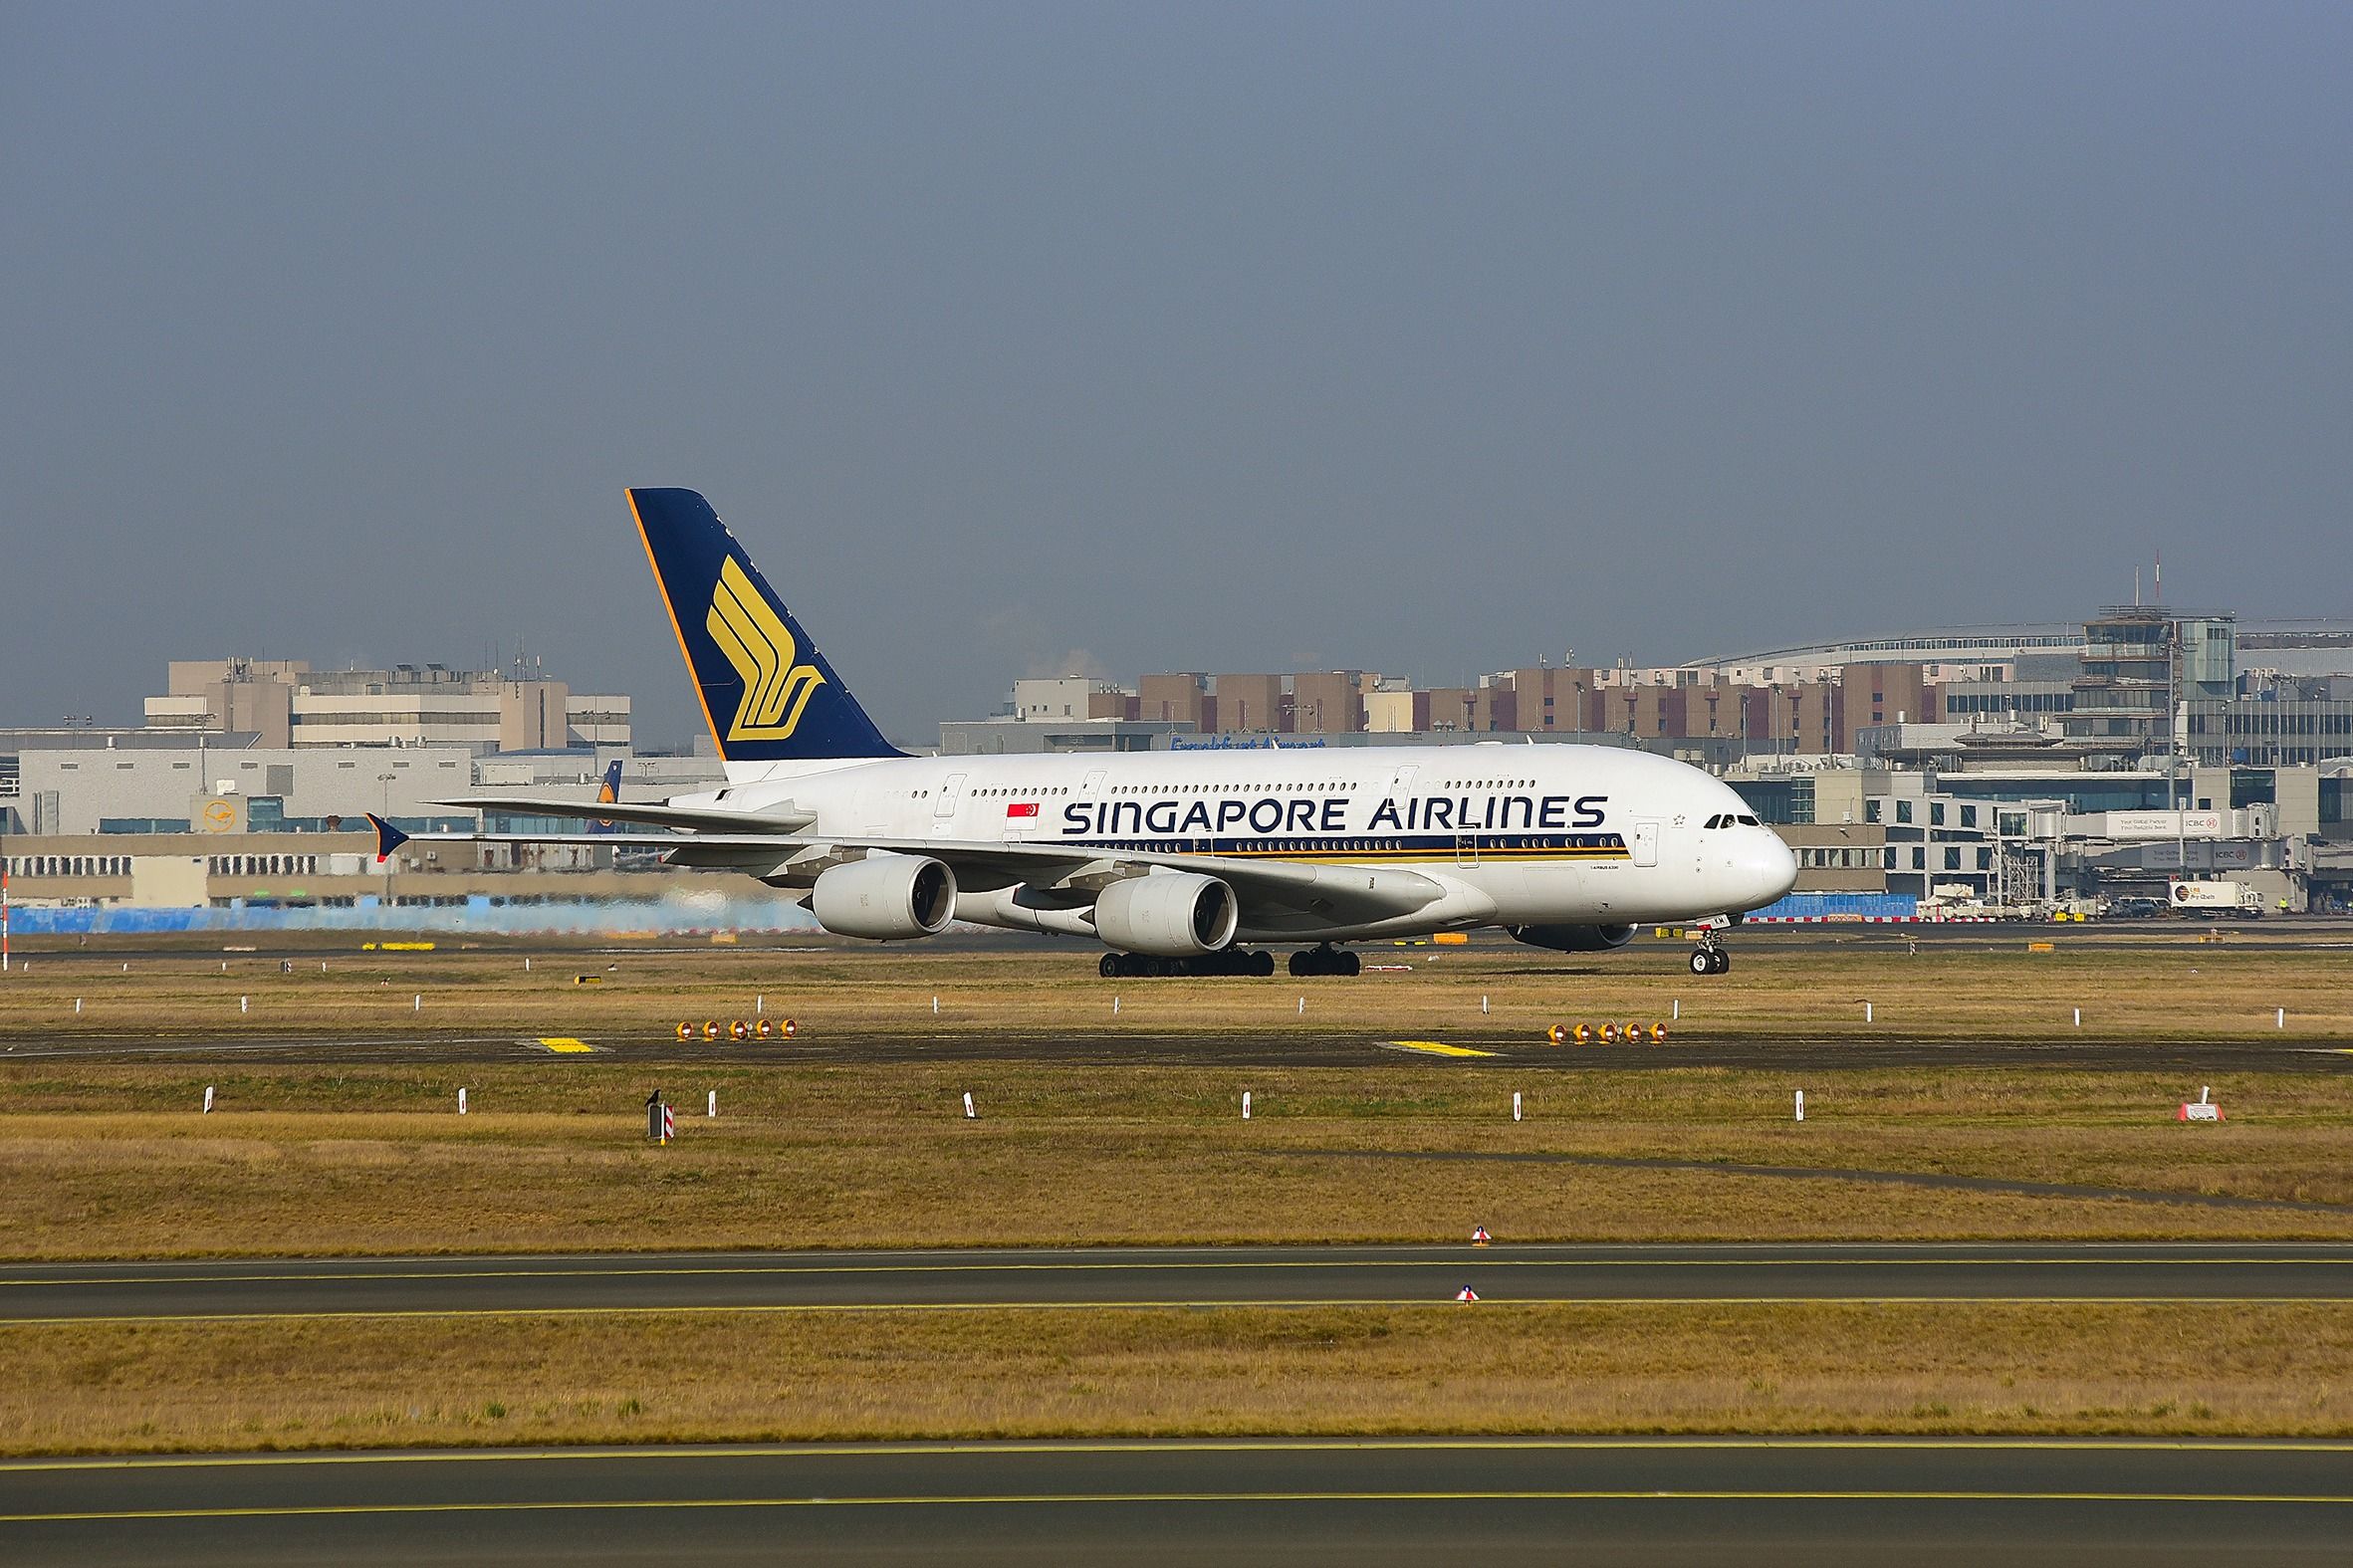 Singapore Airlines Airbus A380 on the runway